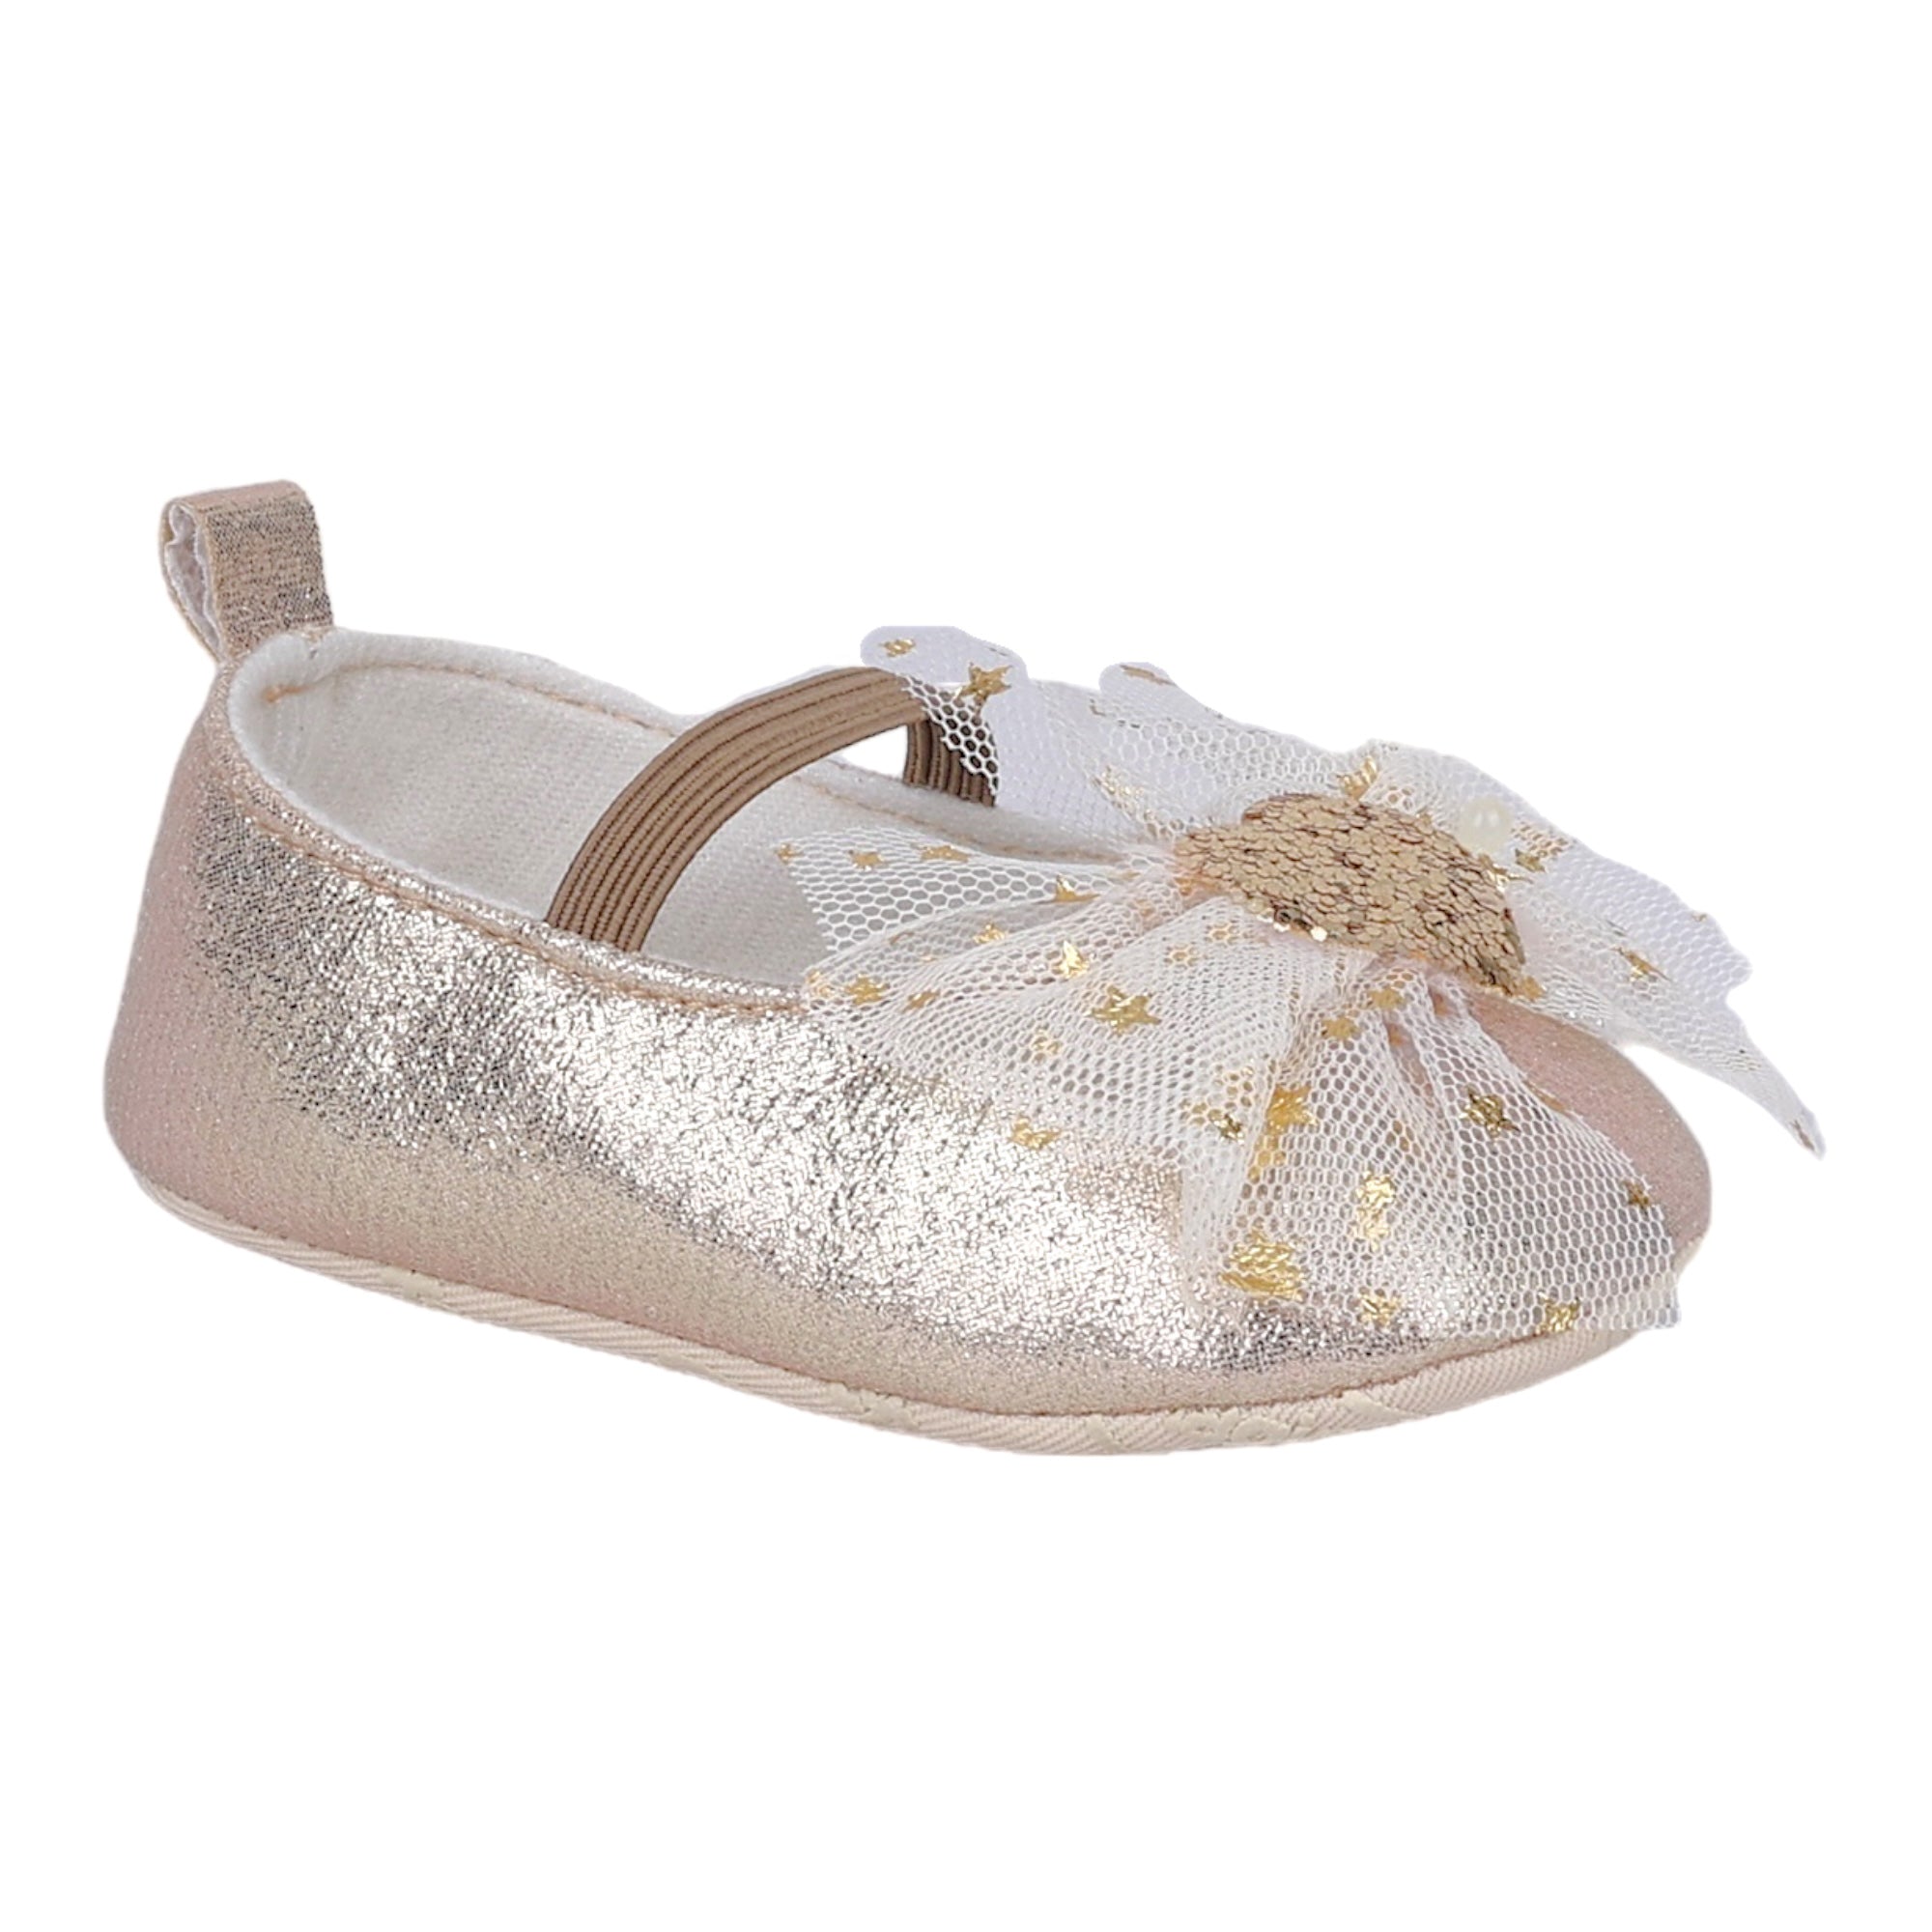 Baby Moo Embellished Bow Glittery Heart Anti-Skid Ballerina Booties - Gold